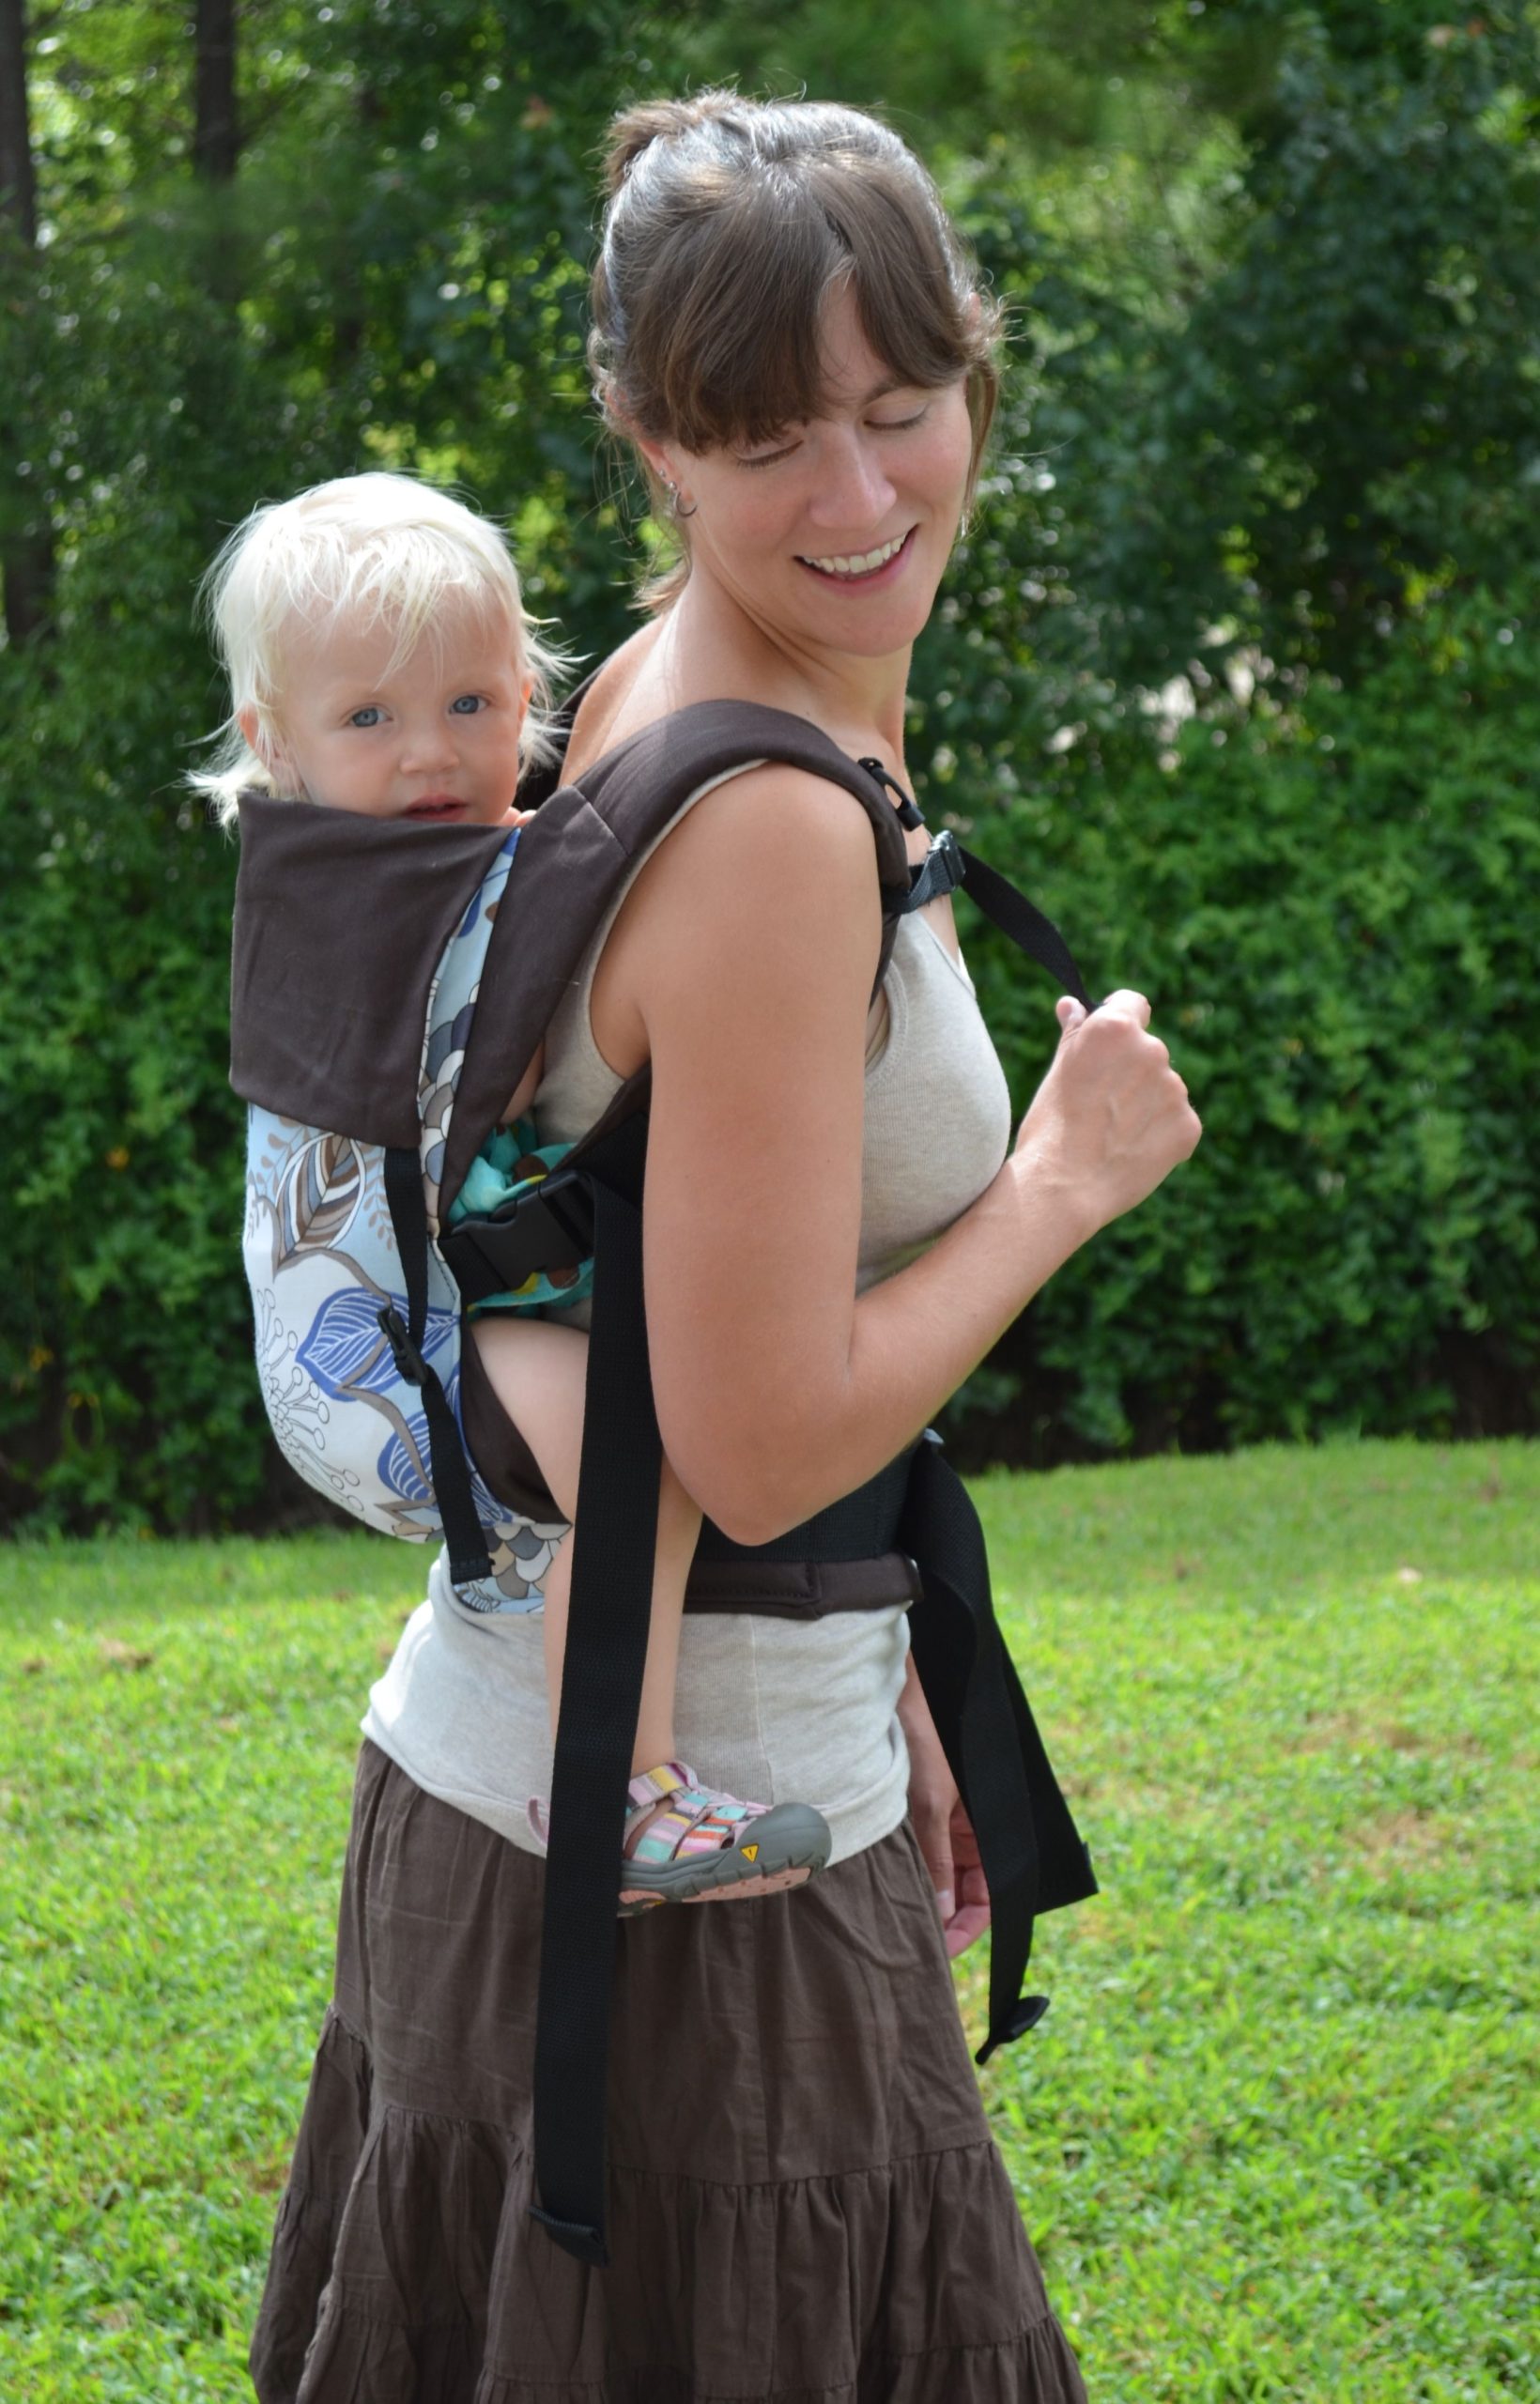 soft structured baby carrier